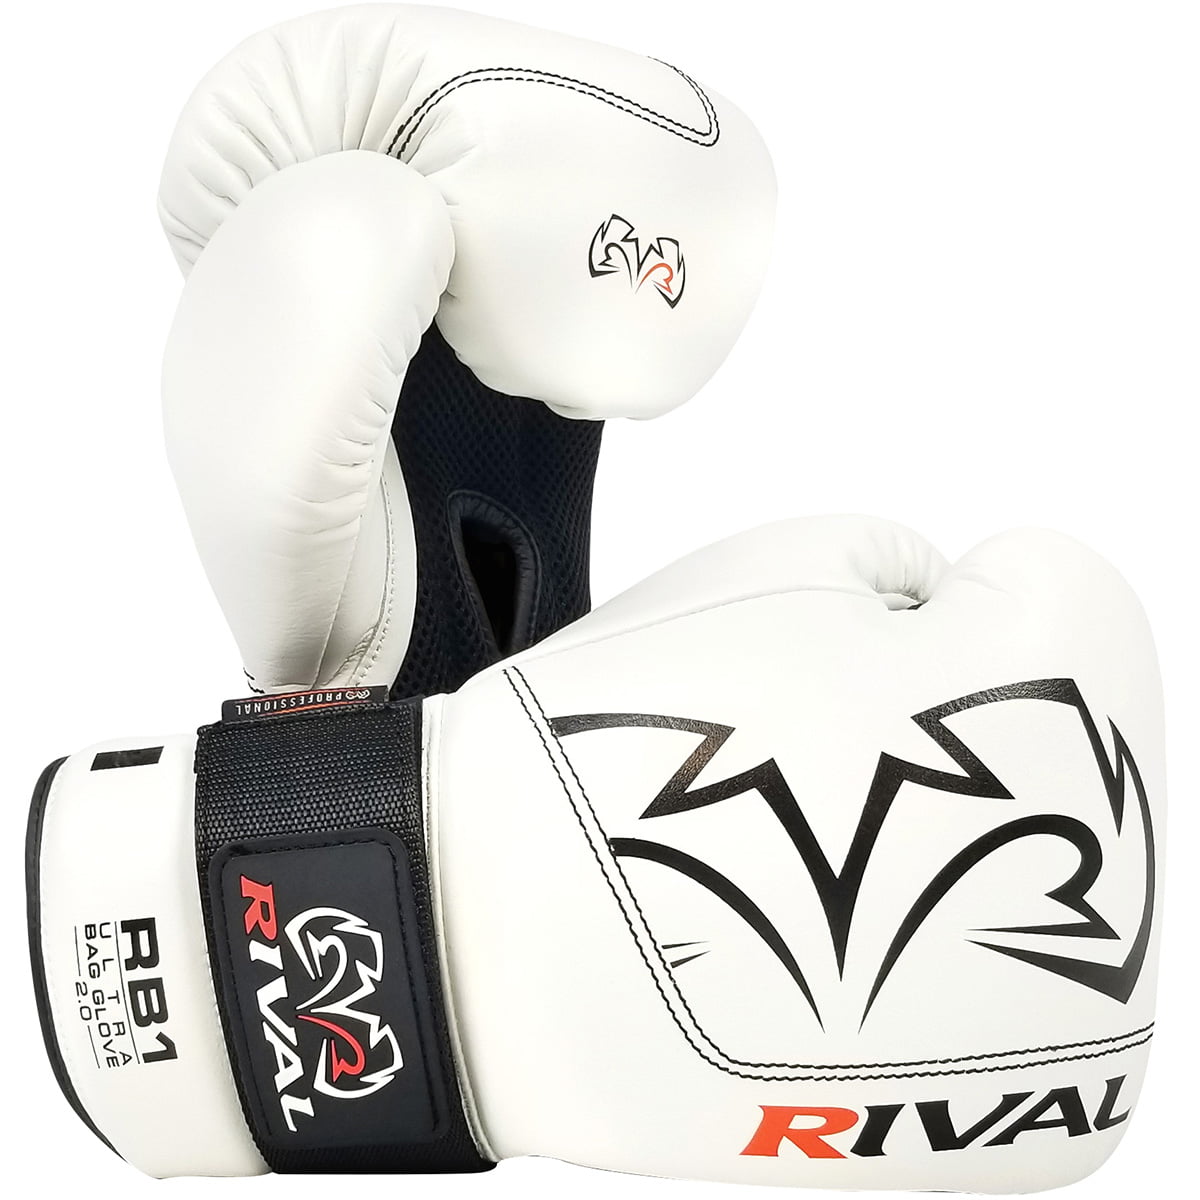 Purple/White 14 oz Hook and Loop Bag Gloves Rival Boxing RB7 Fitness 